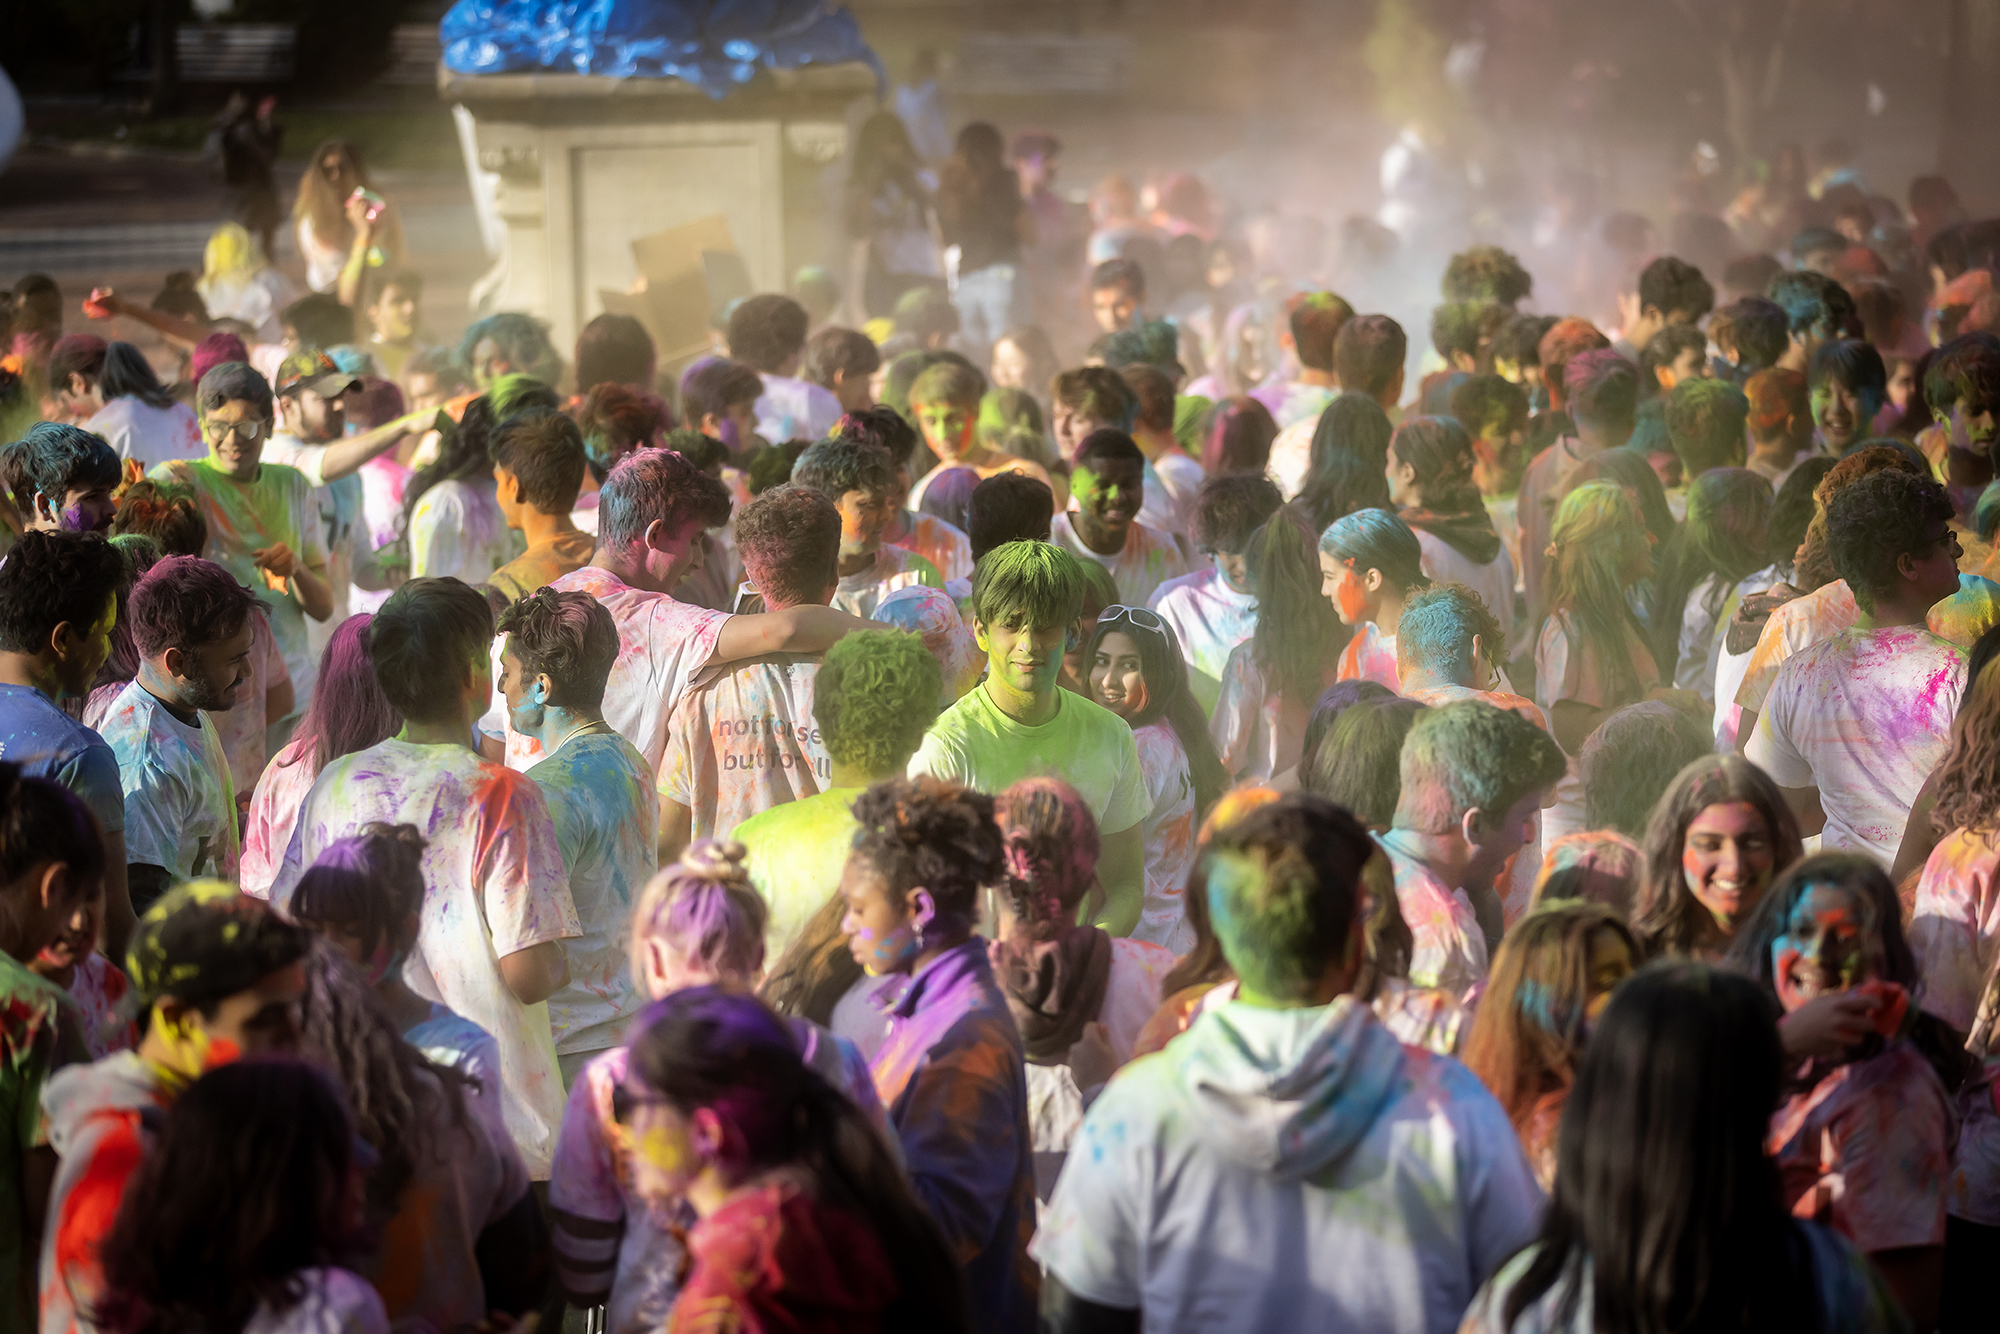 A crowd of Penn students covered in colored powder celebrating Holi on College Green.